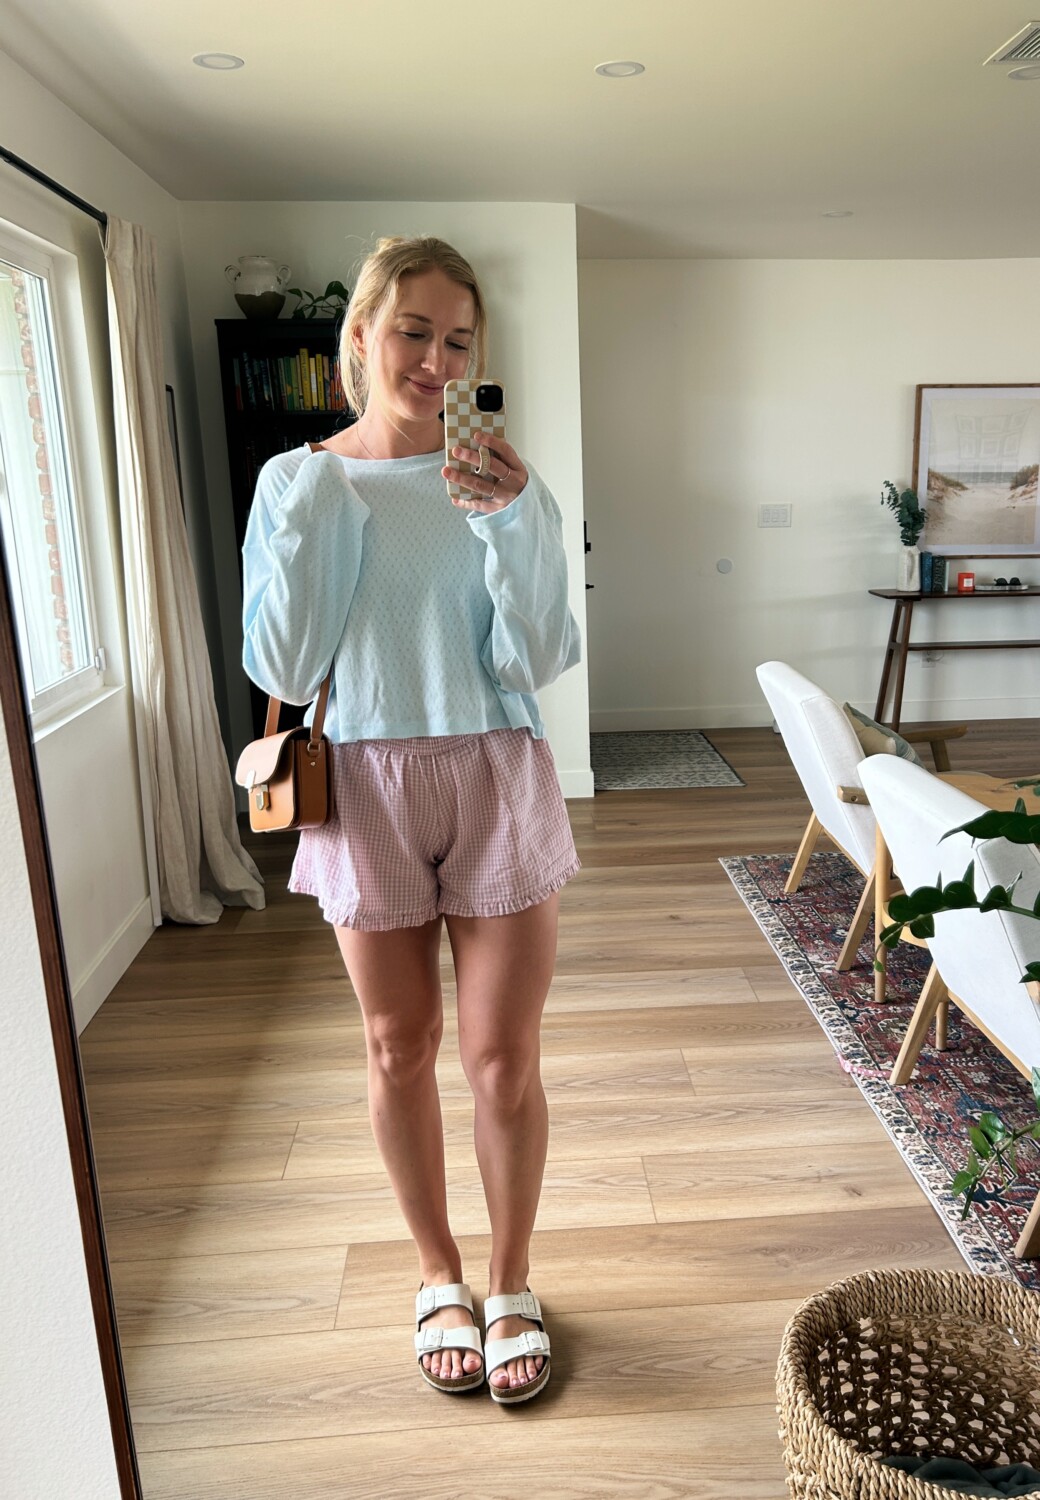 Ruth Nuss wearing a light blue pointelle top and pink boxer shorts